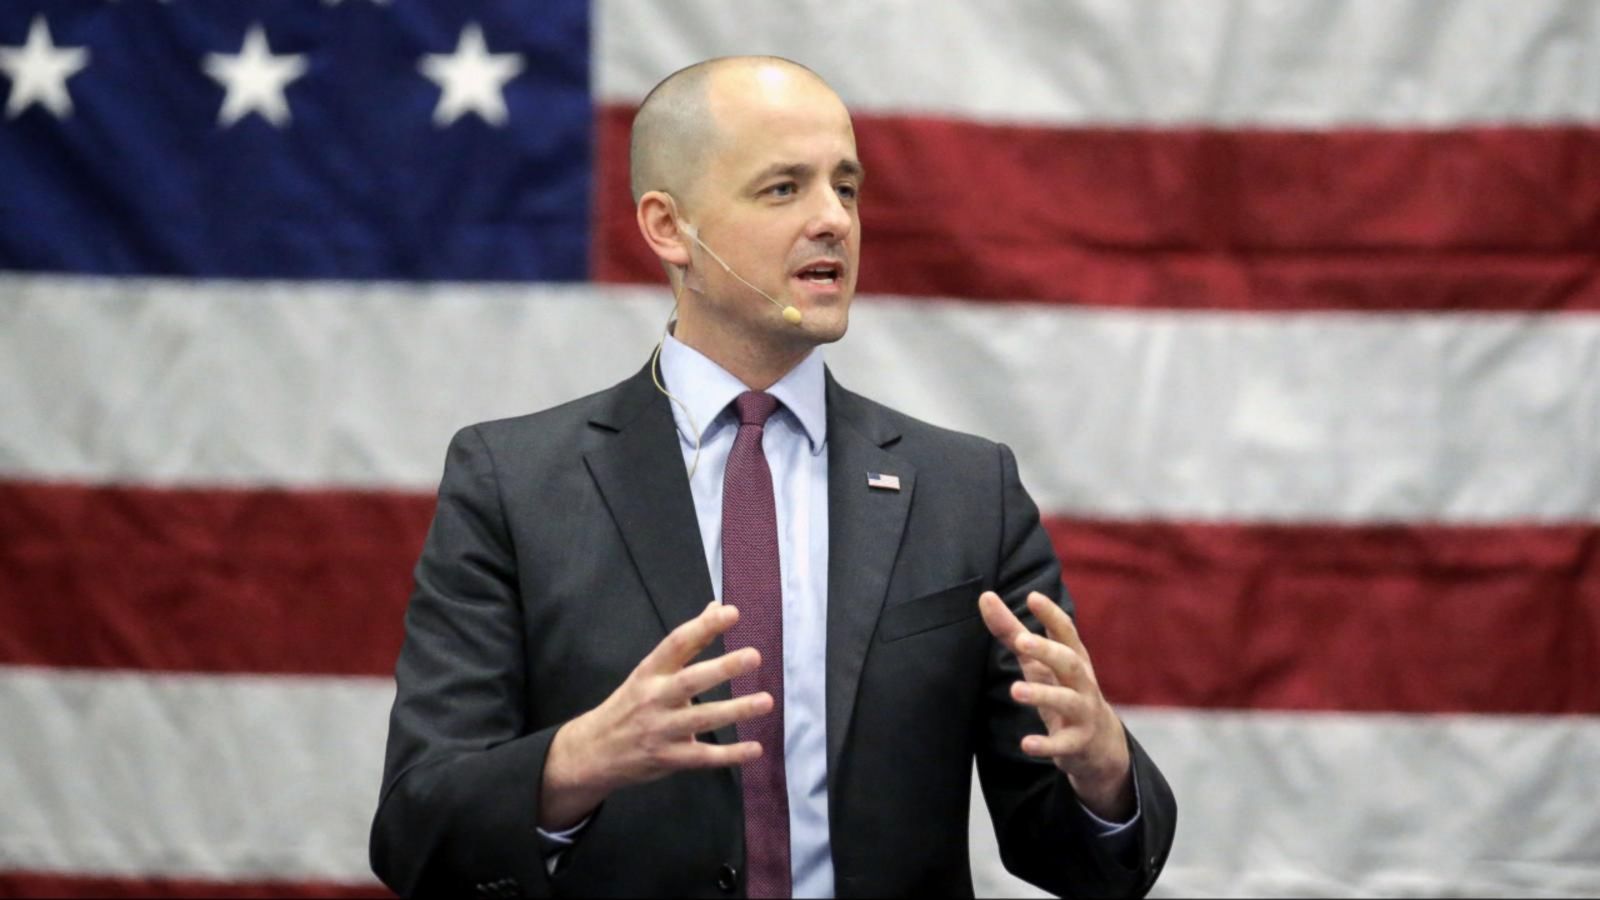 Independent Candidate Evan McMullin Could Make History This Election